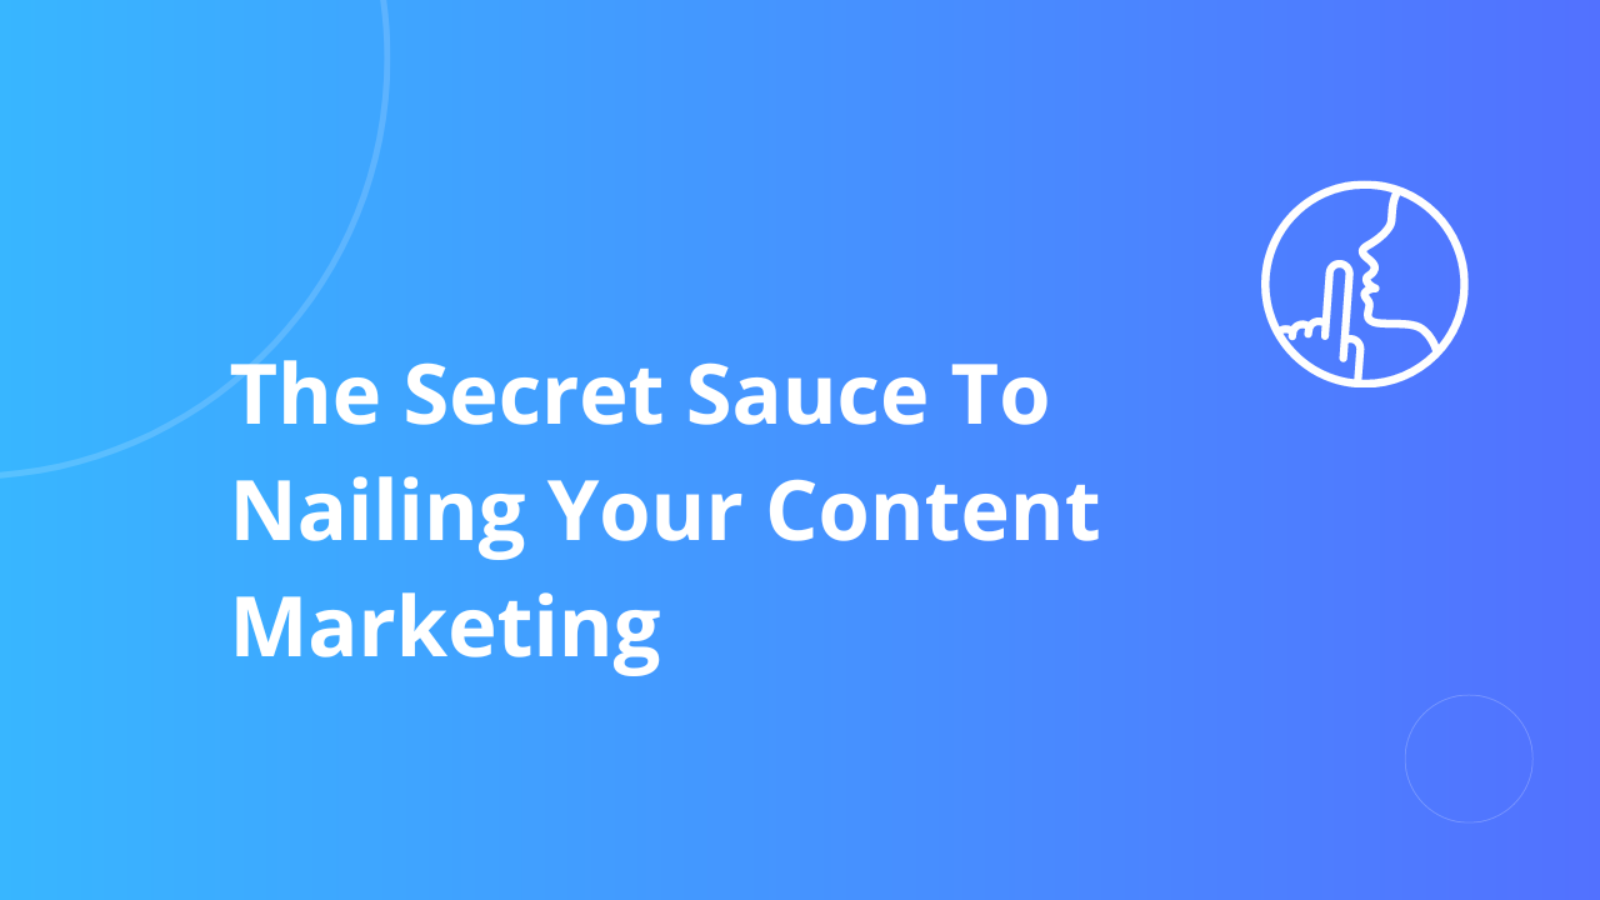 The Secret Sauce To Nailing Your Content Marketing For Sales